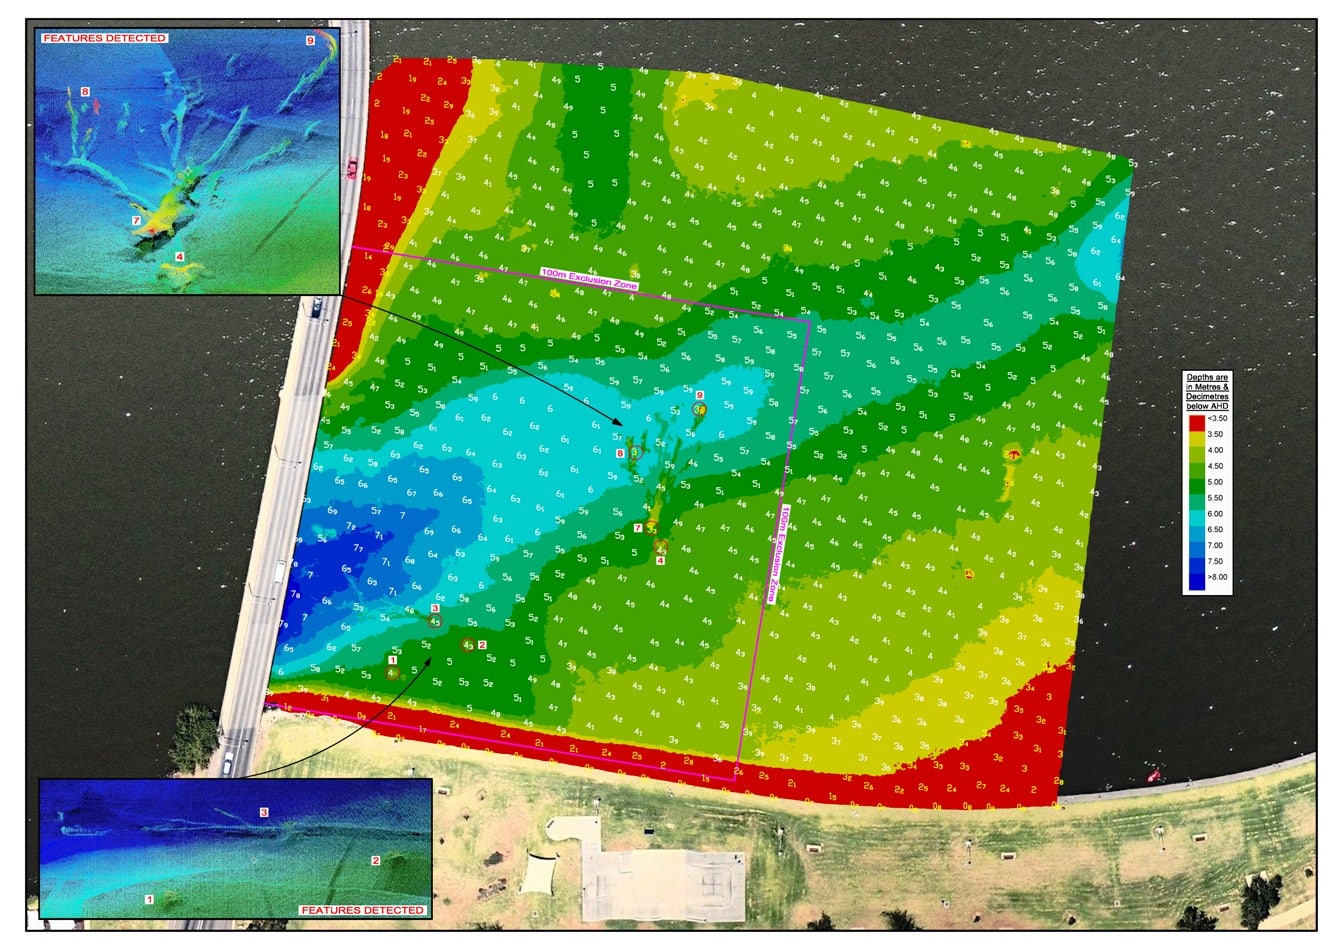 High Res images from the survey conducted on Lake